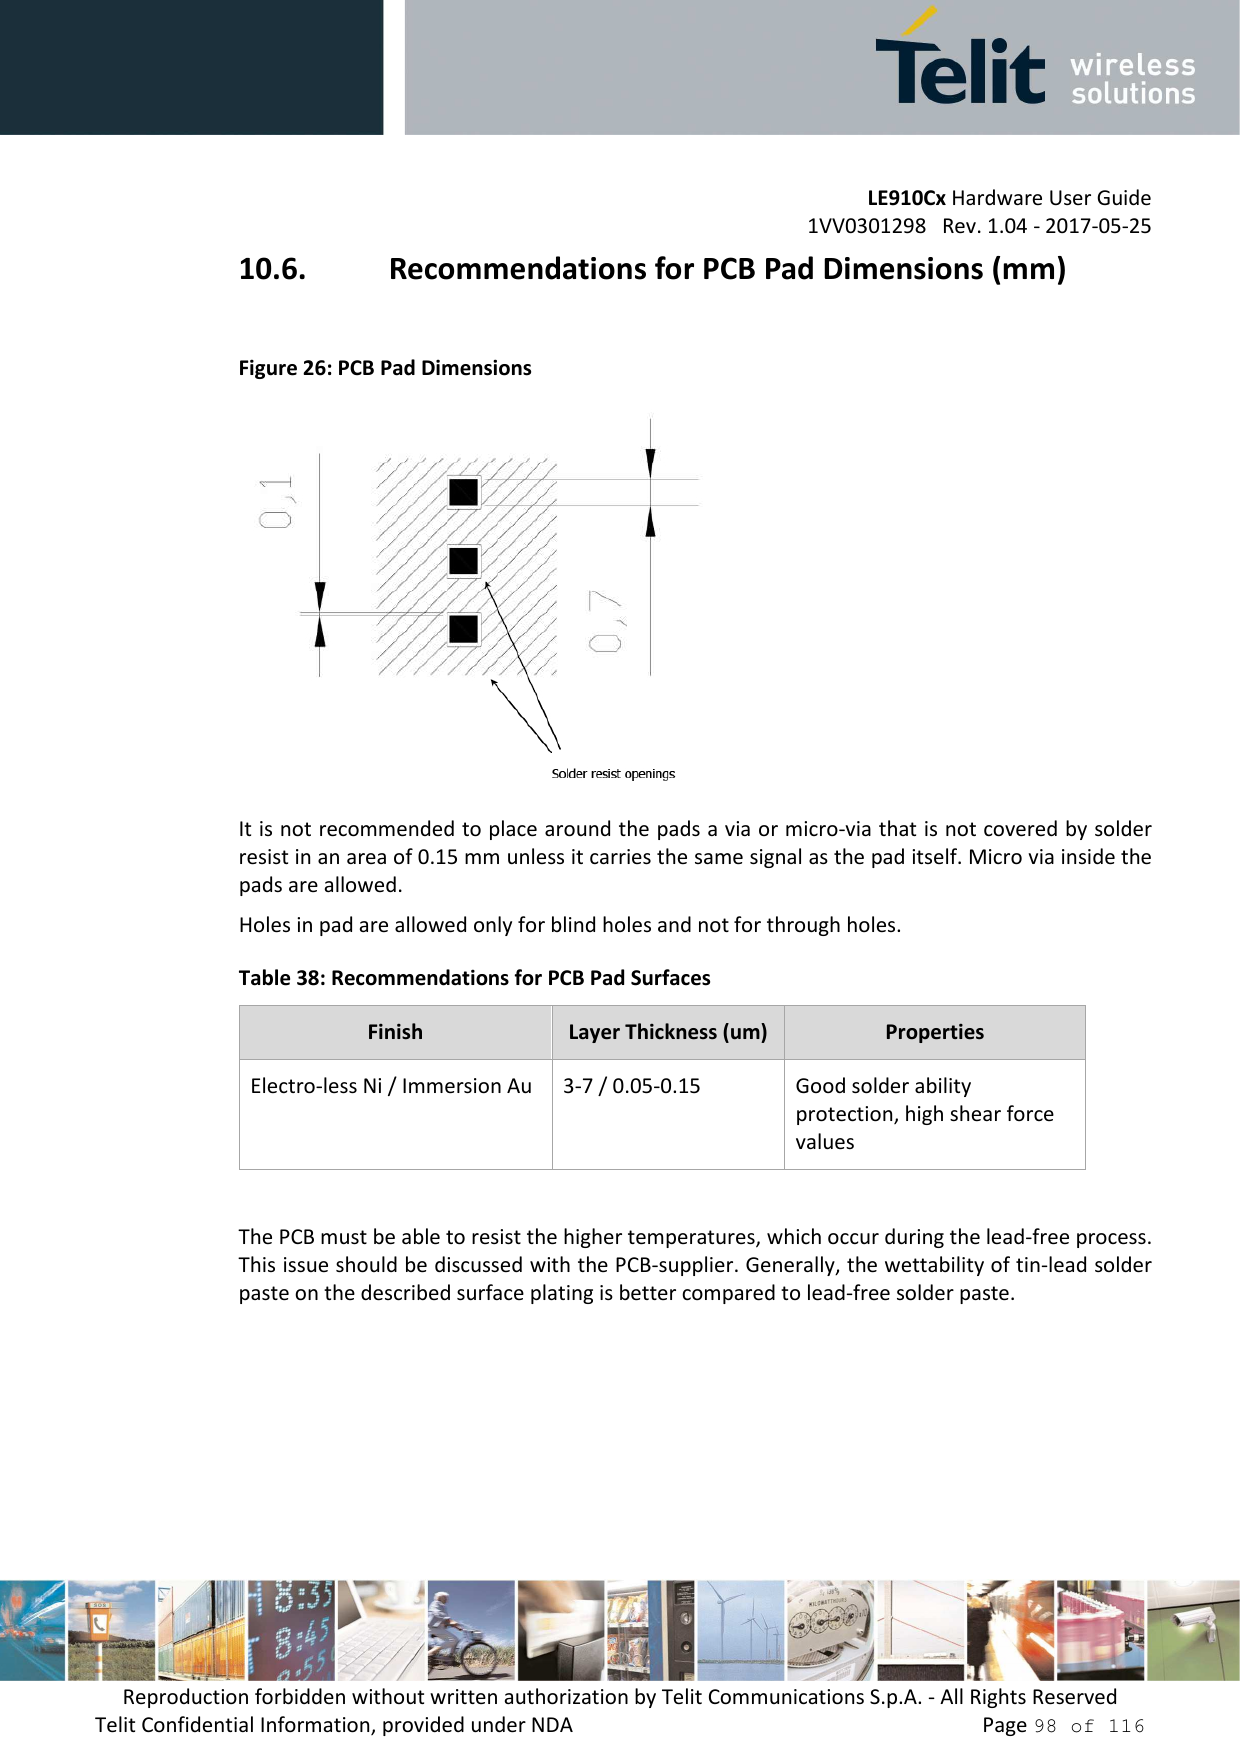         LE910Cx Hardware User Guide 1VV0301298   Rev. 1.04 - 2017-05-25 Reproduction forbidden without written authorization by Telit Communications S.p.A. - All Rights Reserved Telit Confidential Information, provided under NDA                 Page 98 of 116 10.6. Recommendations for PCB Pad Dimensions (mm)  Figure 26: PCB Pad Dimensions  It is not recommended to place around the pads a via or micro-via that is not covered by solder resist in an area of 0.15 mm unless it carries the same signal as the pad itself. Micro via inside the pads are allowed. Holes in pad are allowed only for blind holes and not for through holes. Table 38: Recommendations for PCB Pad Surfaces Finish  Layer Thickness (um)  Properties Electro-less Ni / Immersion Au  3-7 / 0.05-0.15  Good solder ability protection, high shear force values  The PCB must be able to resist the higher temperatures, which occur during the lead-free process. This issue should be discussed with the PCB-supplier. Generally, the wettability of tin-lead solder paste on the described surface plating is better compared to lead-free solder paste. 